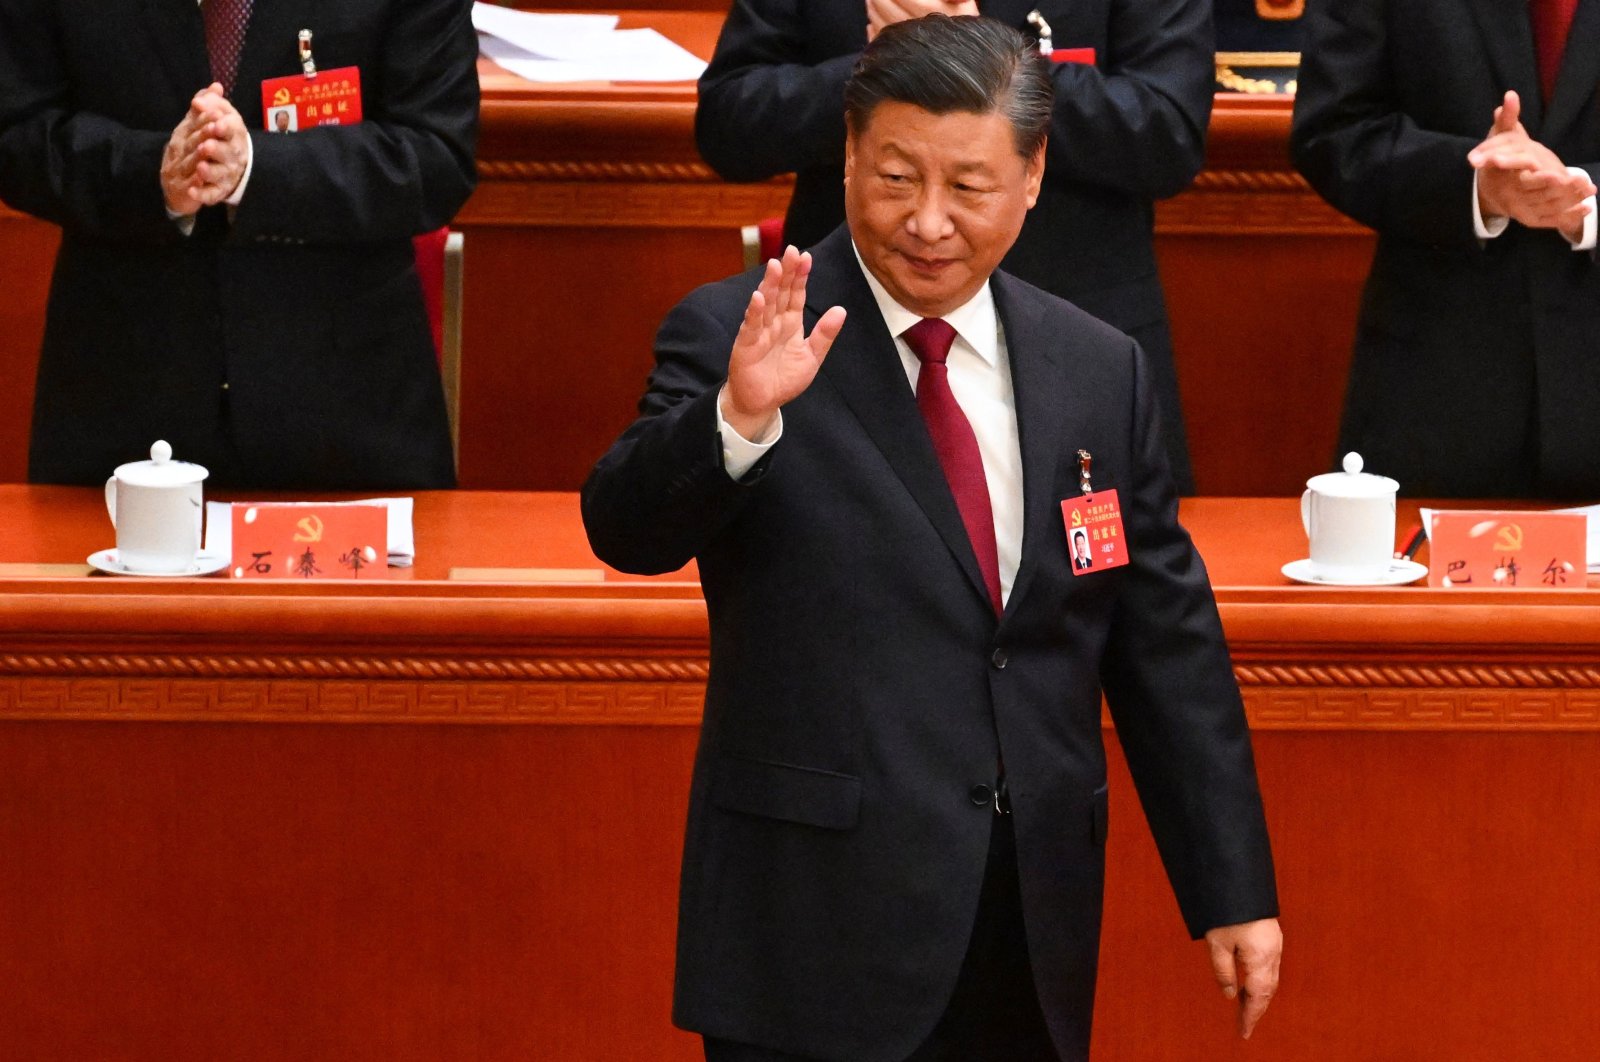 China&#039;s President Xi Jinping waves as he arrives for the opening session of the 20th Chinese Communist Party&#039;s Congress at the Great Hall of the People, Beijing, China, Oct. 16, 2022. (AFP Photo)